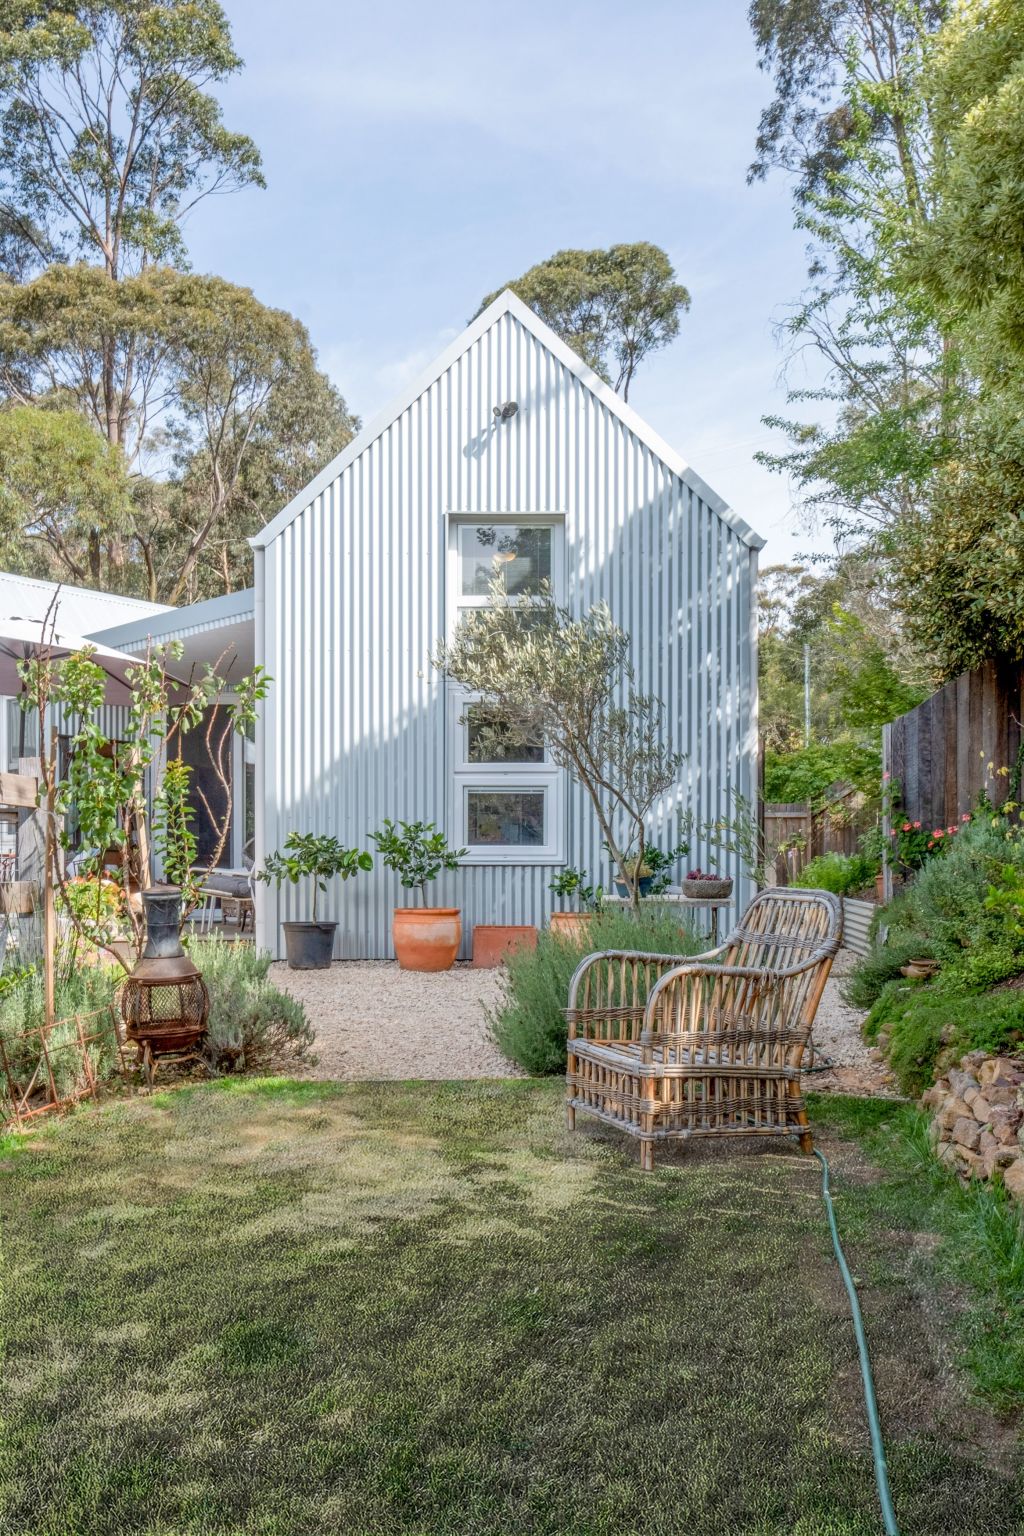 This sweet house has tall windows which are perfectly proportioned but really there for privacy. Photo: Joshua Macaraeg